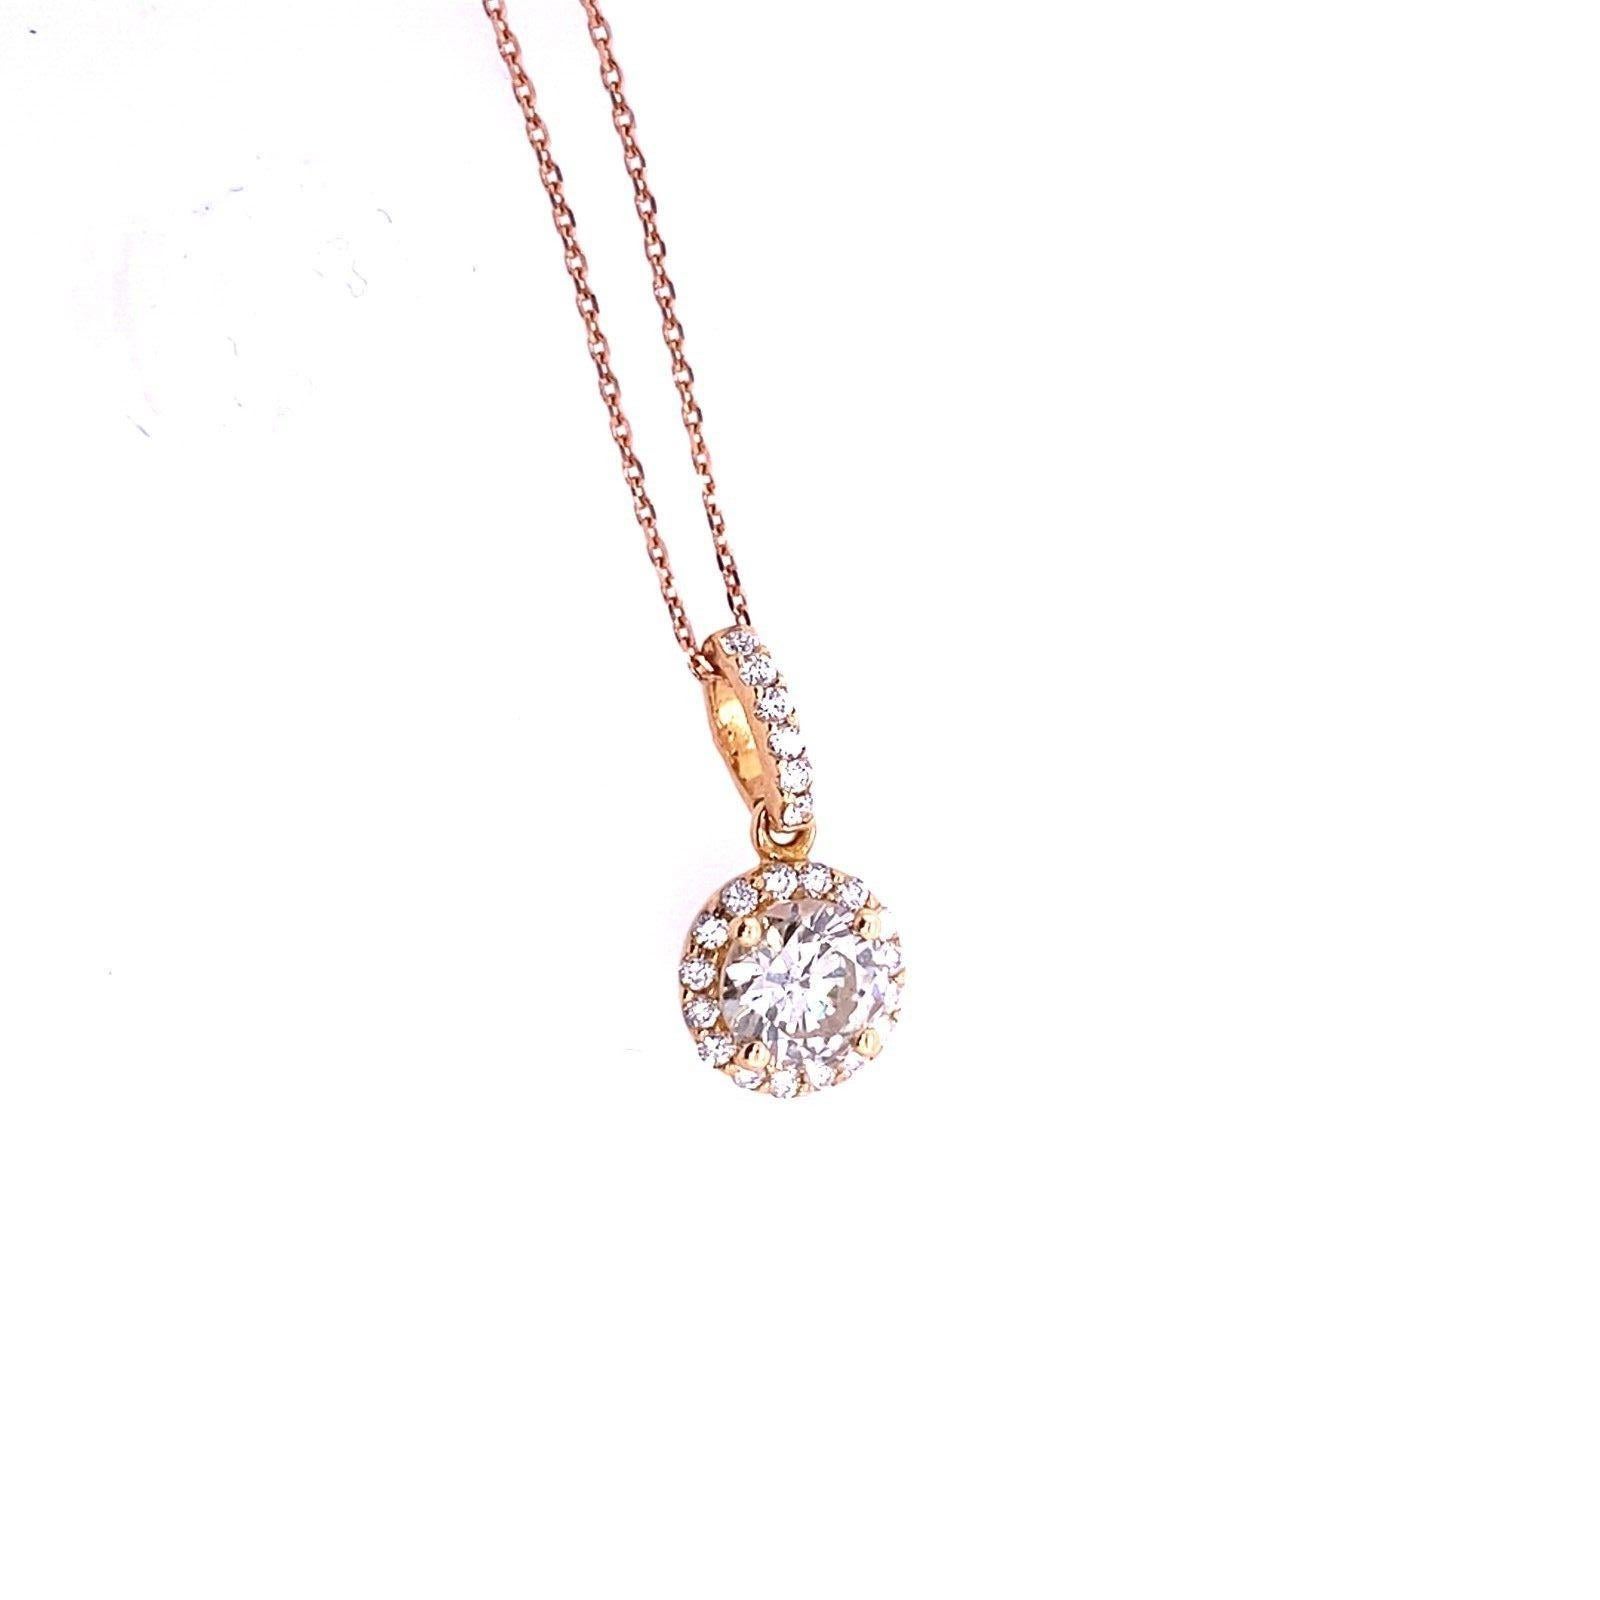 Fine Quality 0.75ct Round Brilliant Cut Diamond Pendant Set in 18ct Rose Gold

This 0.75ct diamond pendant set in 18ct Rose Gold is unique and elegant design, this diamond pendant comes with a diamond halo setting that magnifies the radiance and